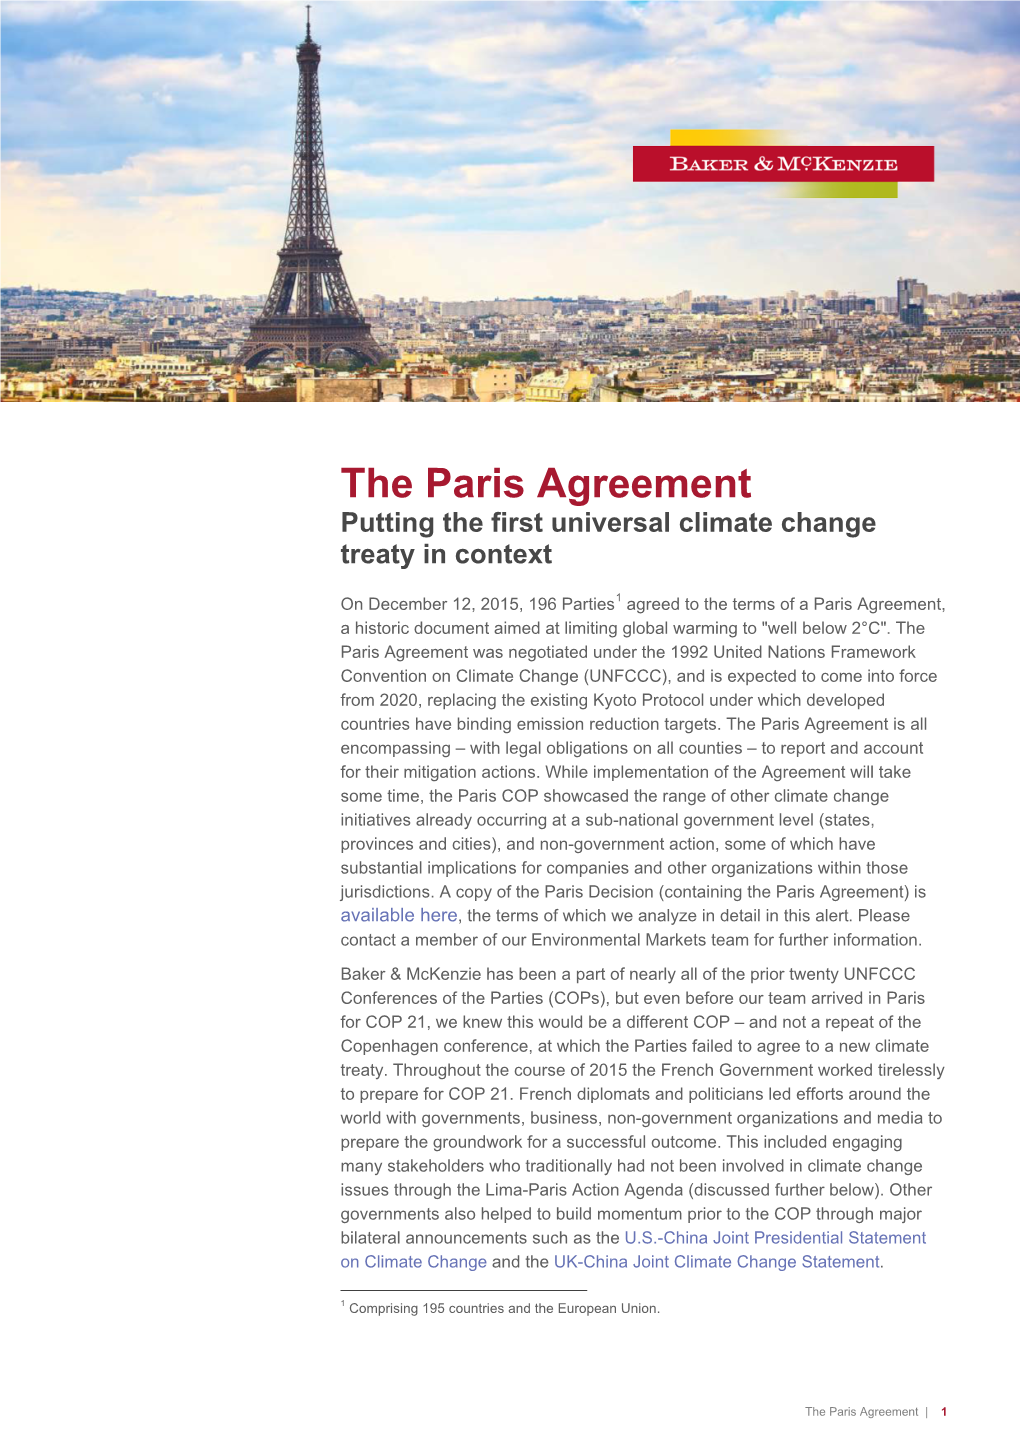 The Paris Agreement Putting the First Universal Climate Change Treaty in Context